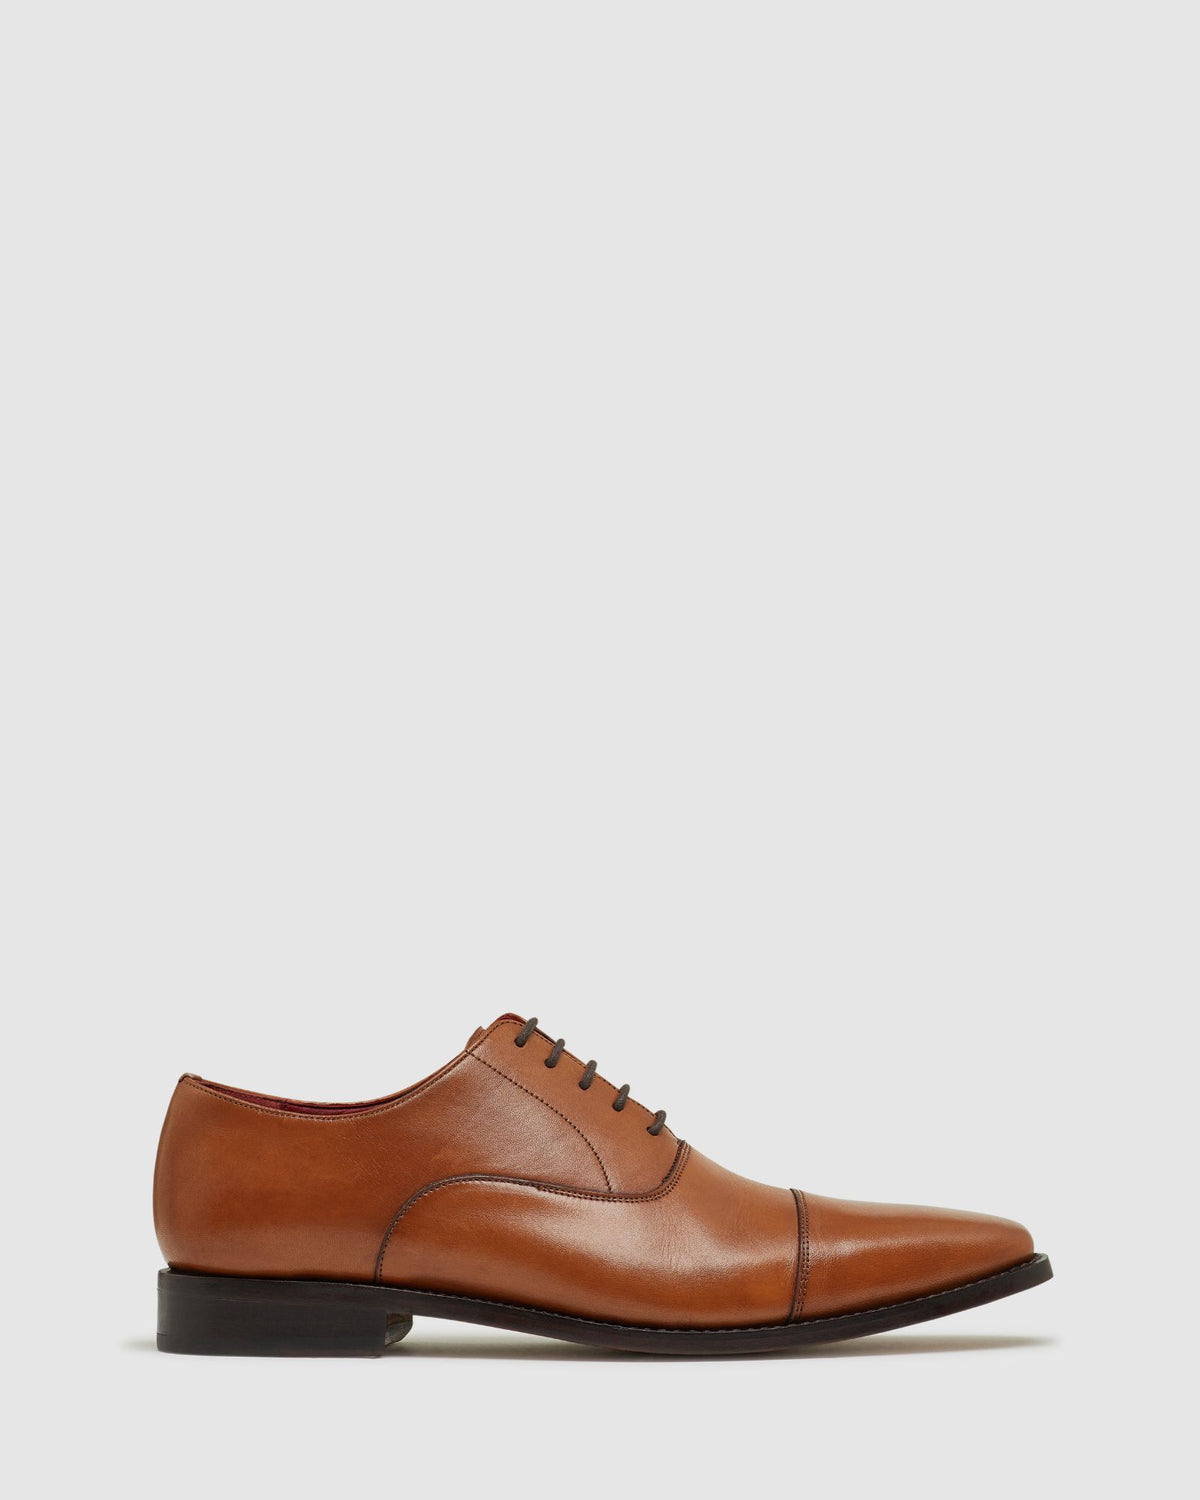 CHRISTOPHER GOODYEAR WELTED SHOES